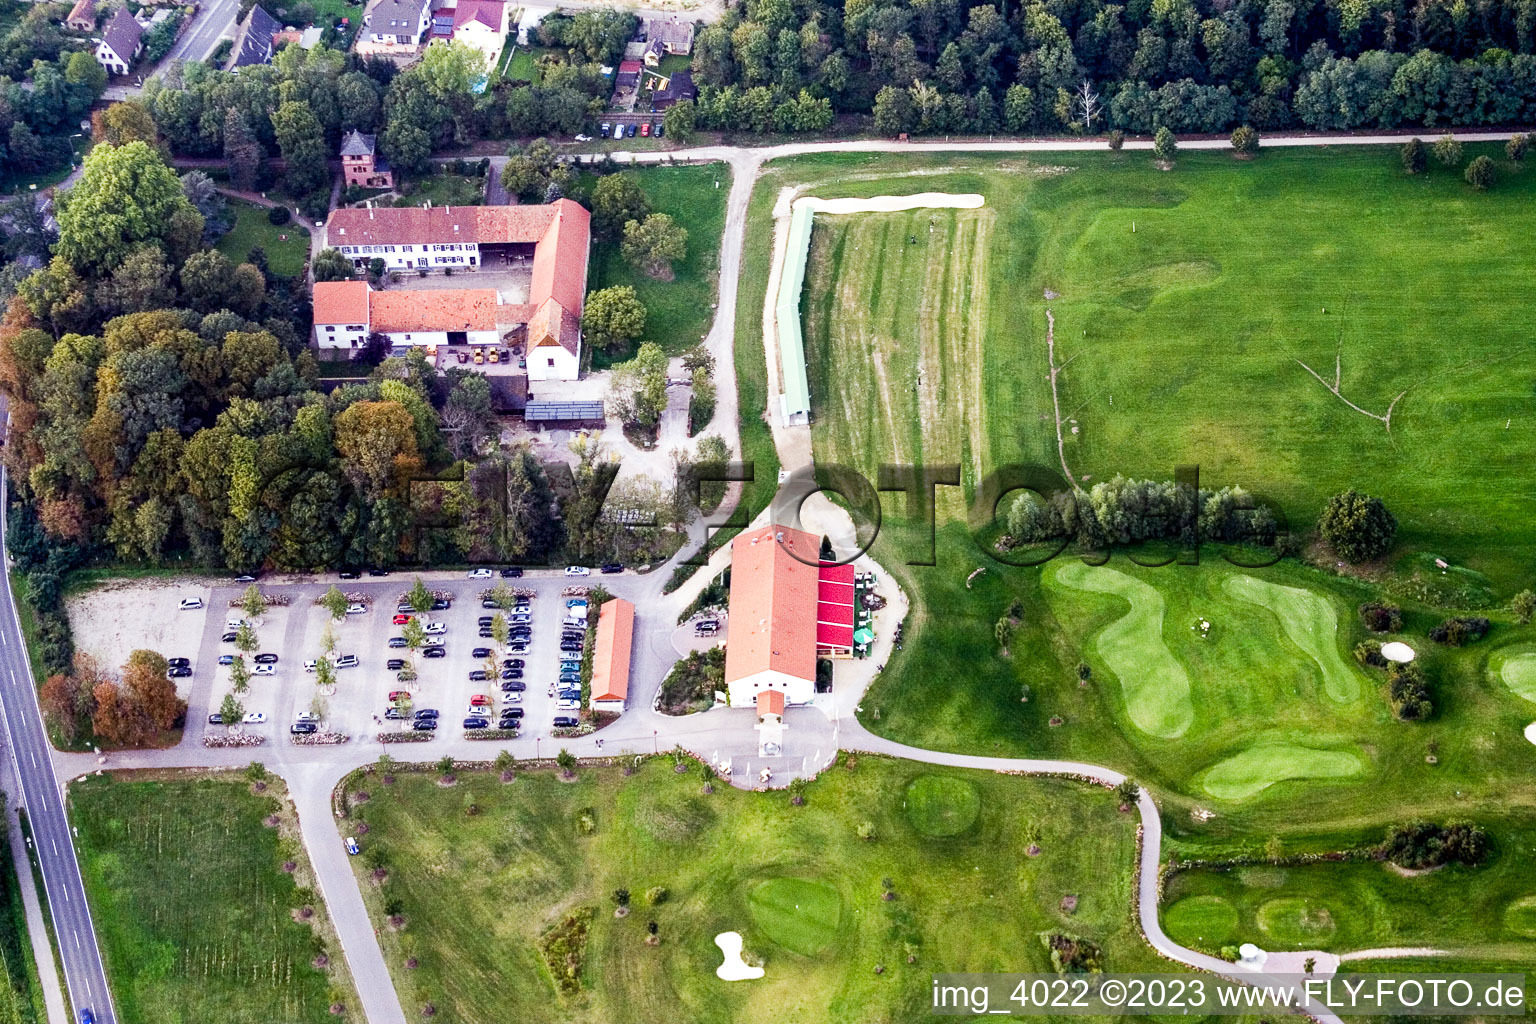 Aerial view of Golf club in Essingen in the state Rhineland-Palatinate, Germany